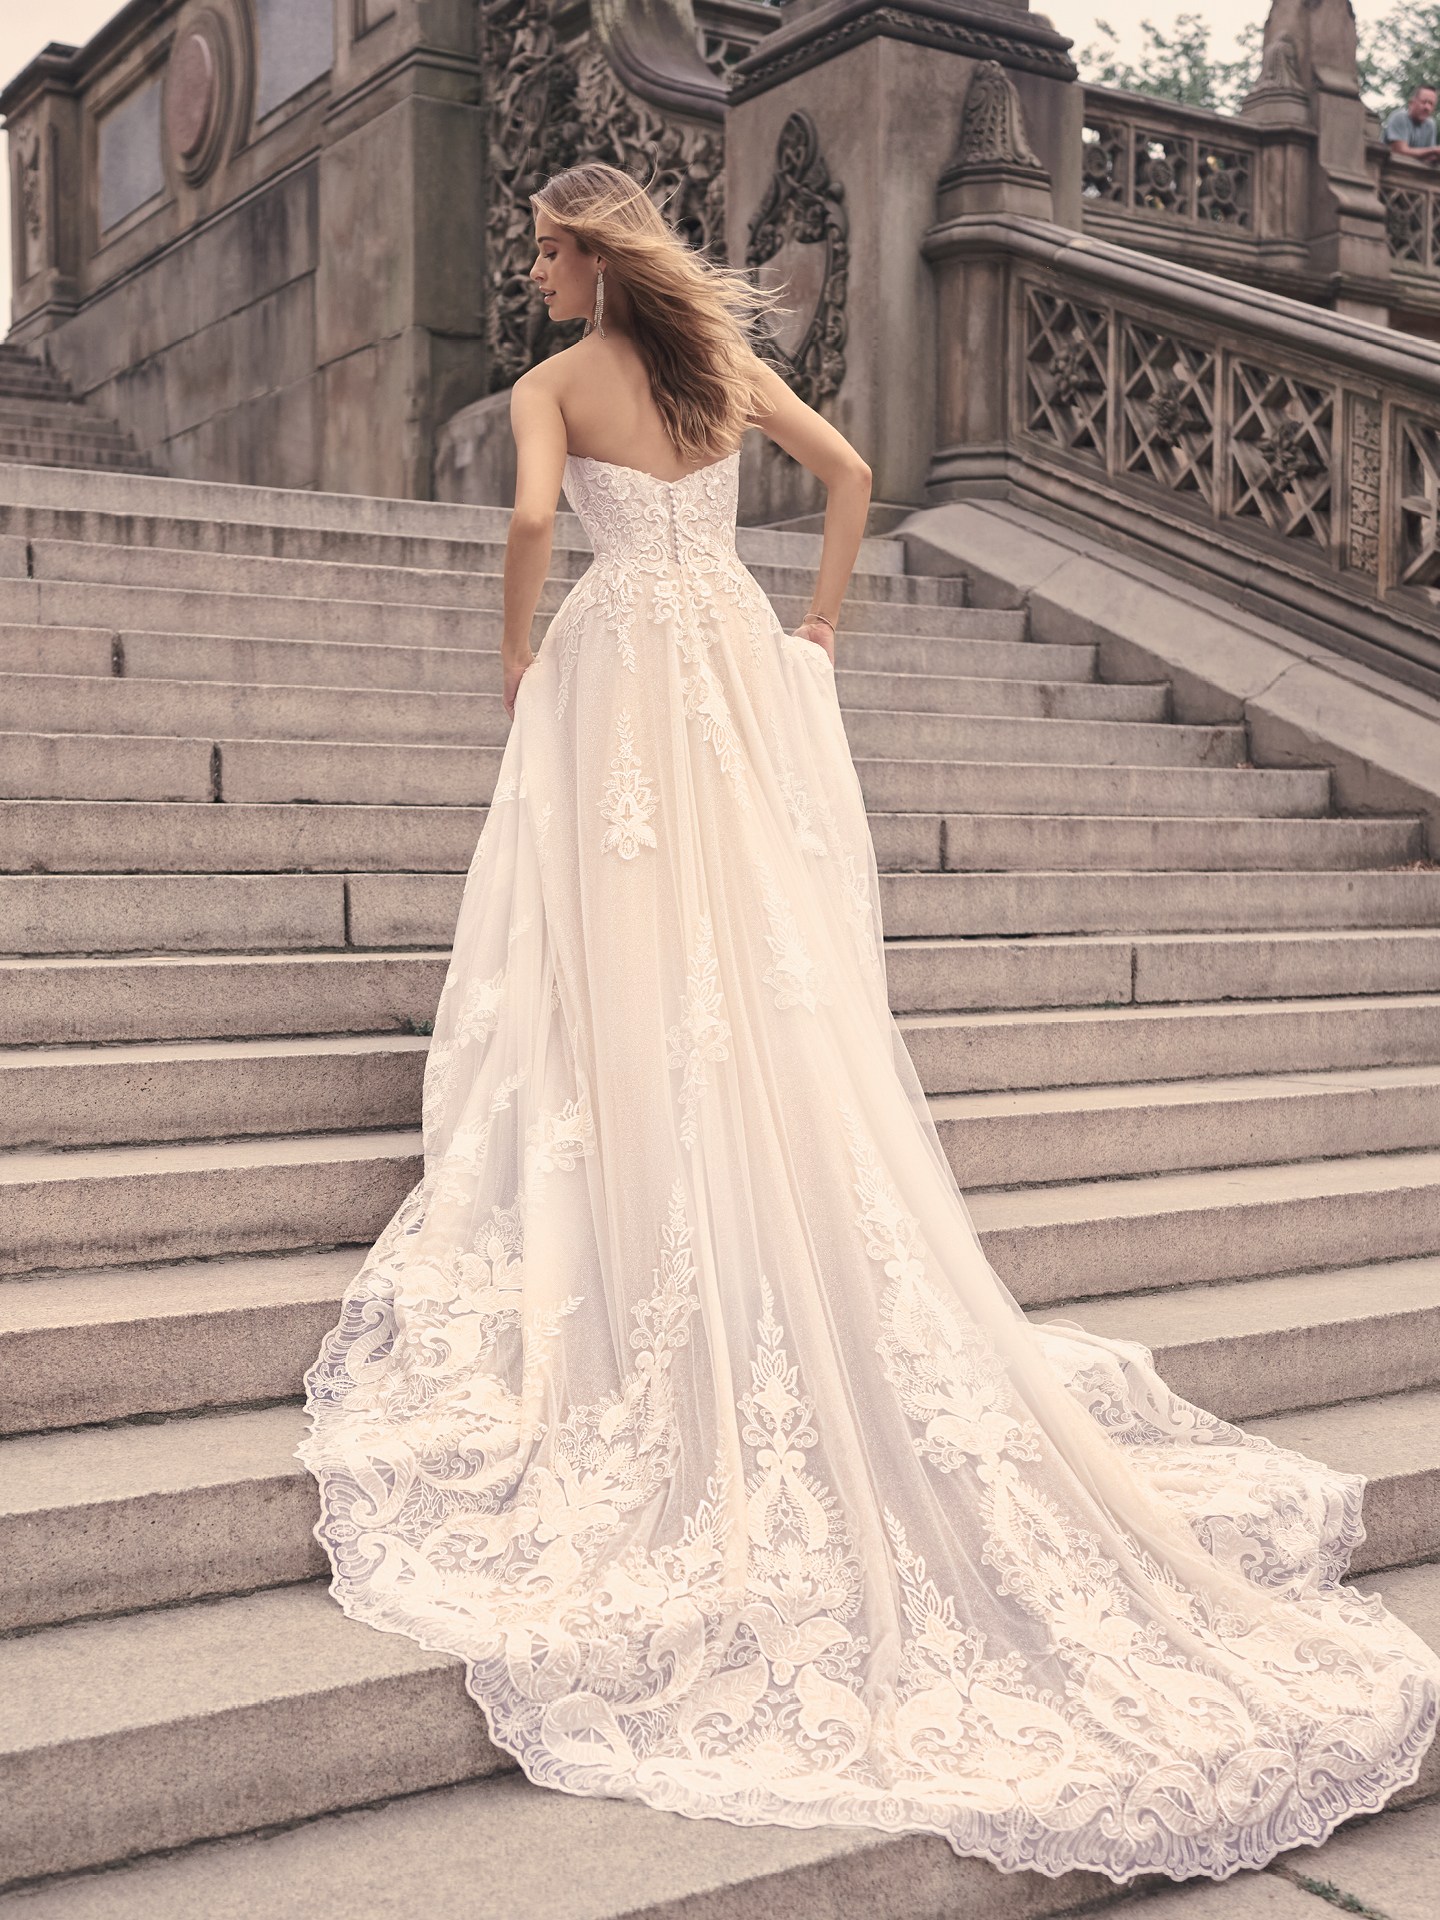 Ball Gown Wedding Dresses | The Knot